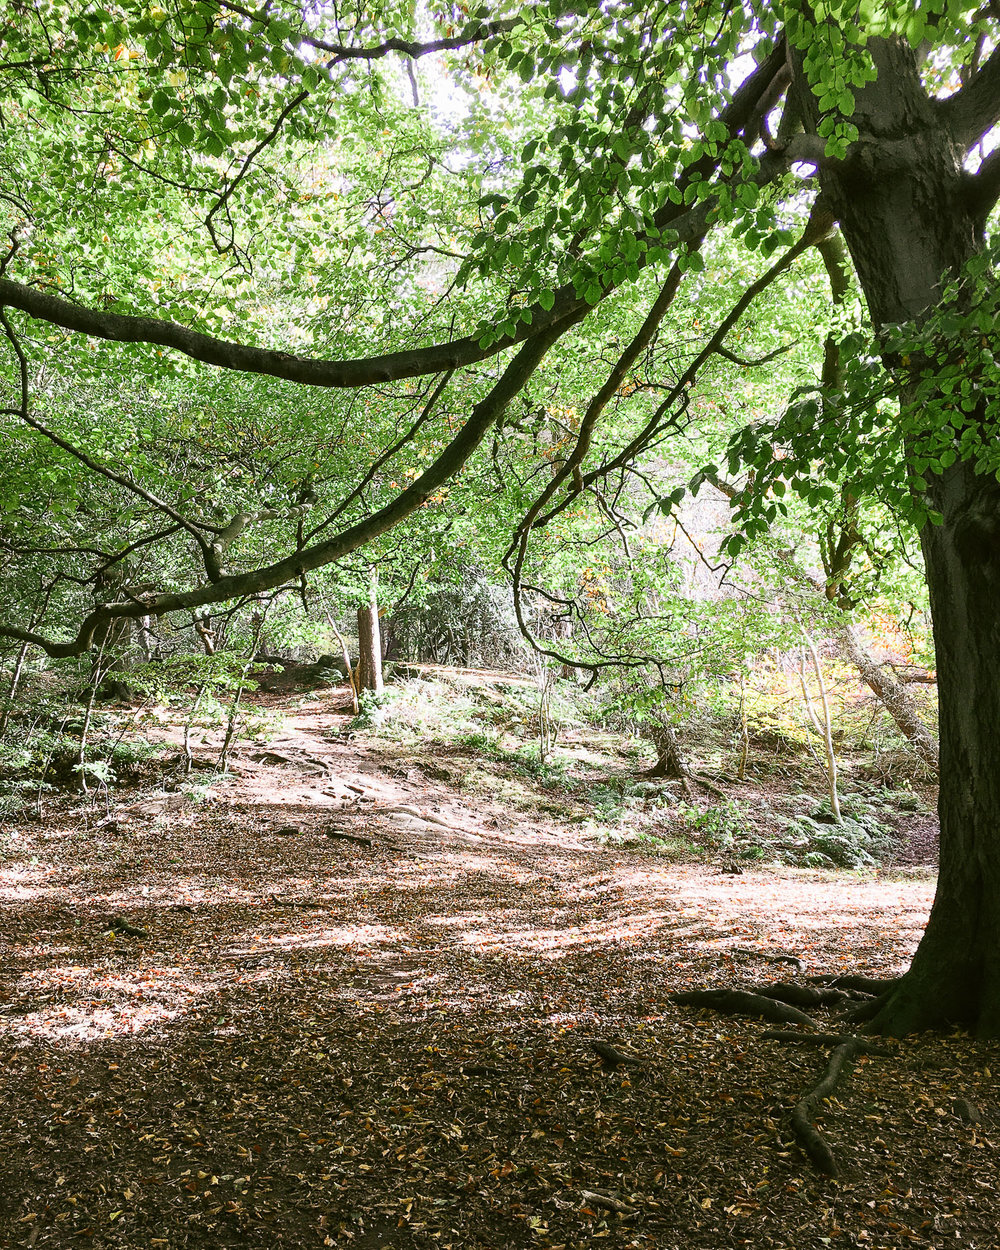 The forest at Costorphine Hill nature reserve